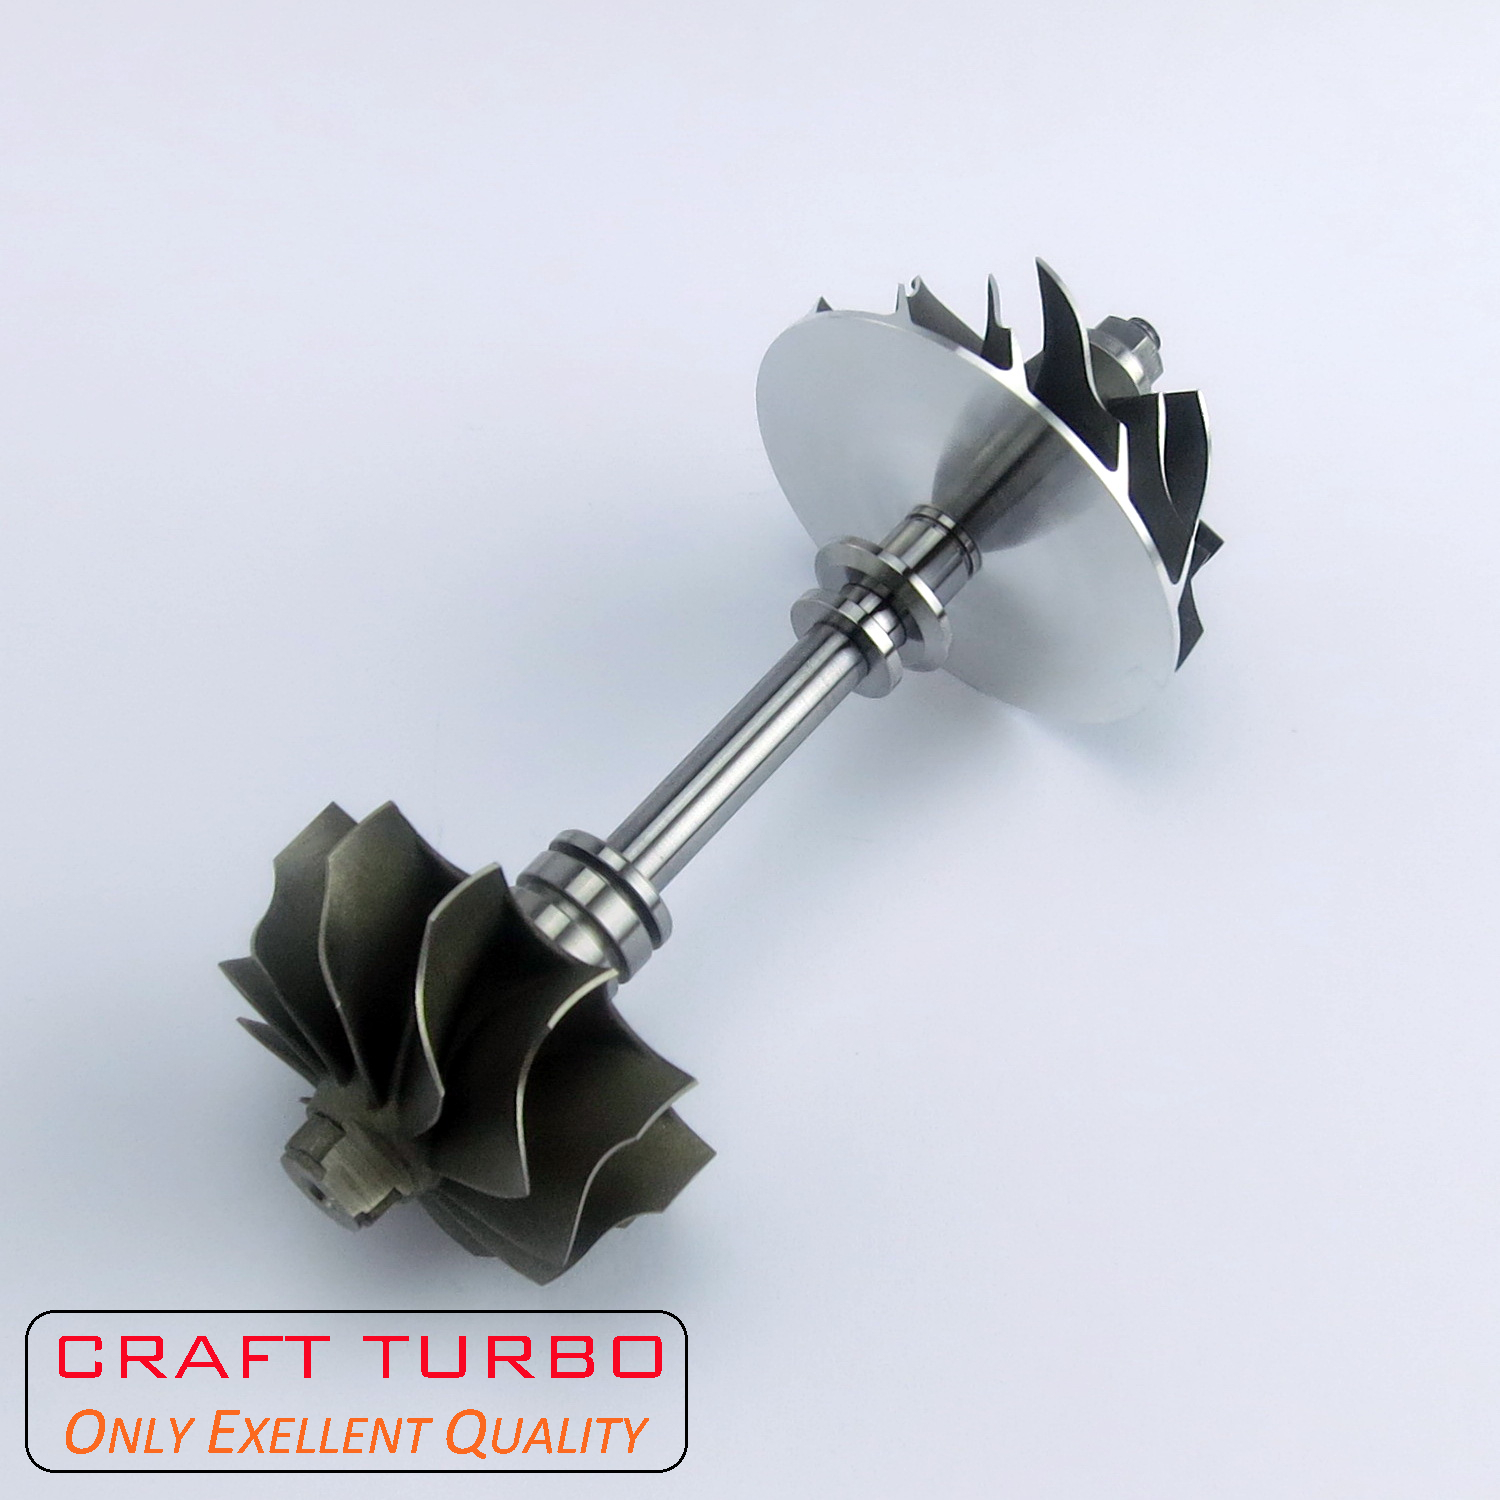 TD03 Rotor for Turbocharger